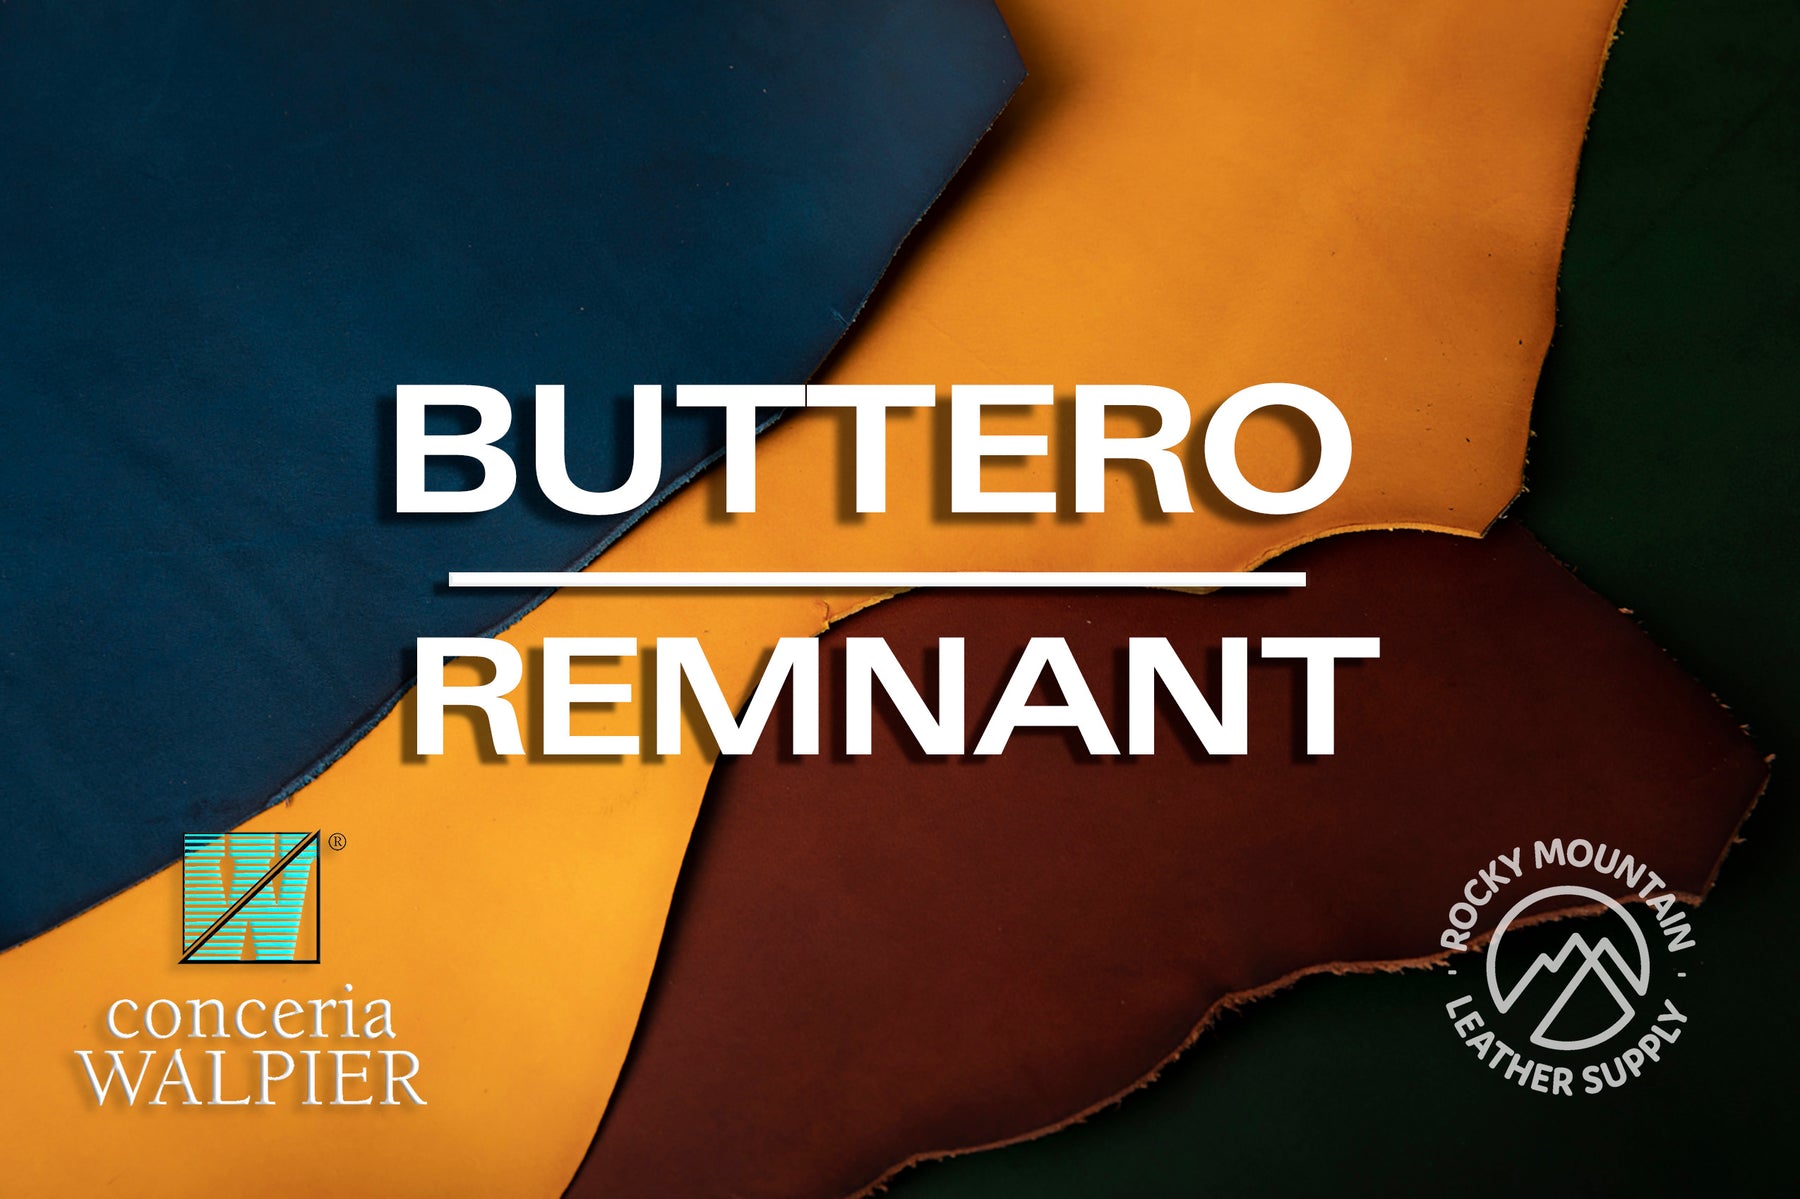 Bundles of Remnant - Walpier Buttero - Discounted!